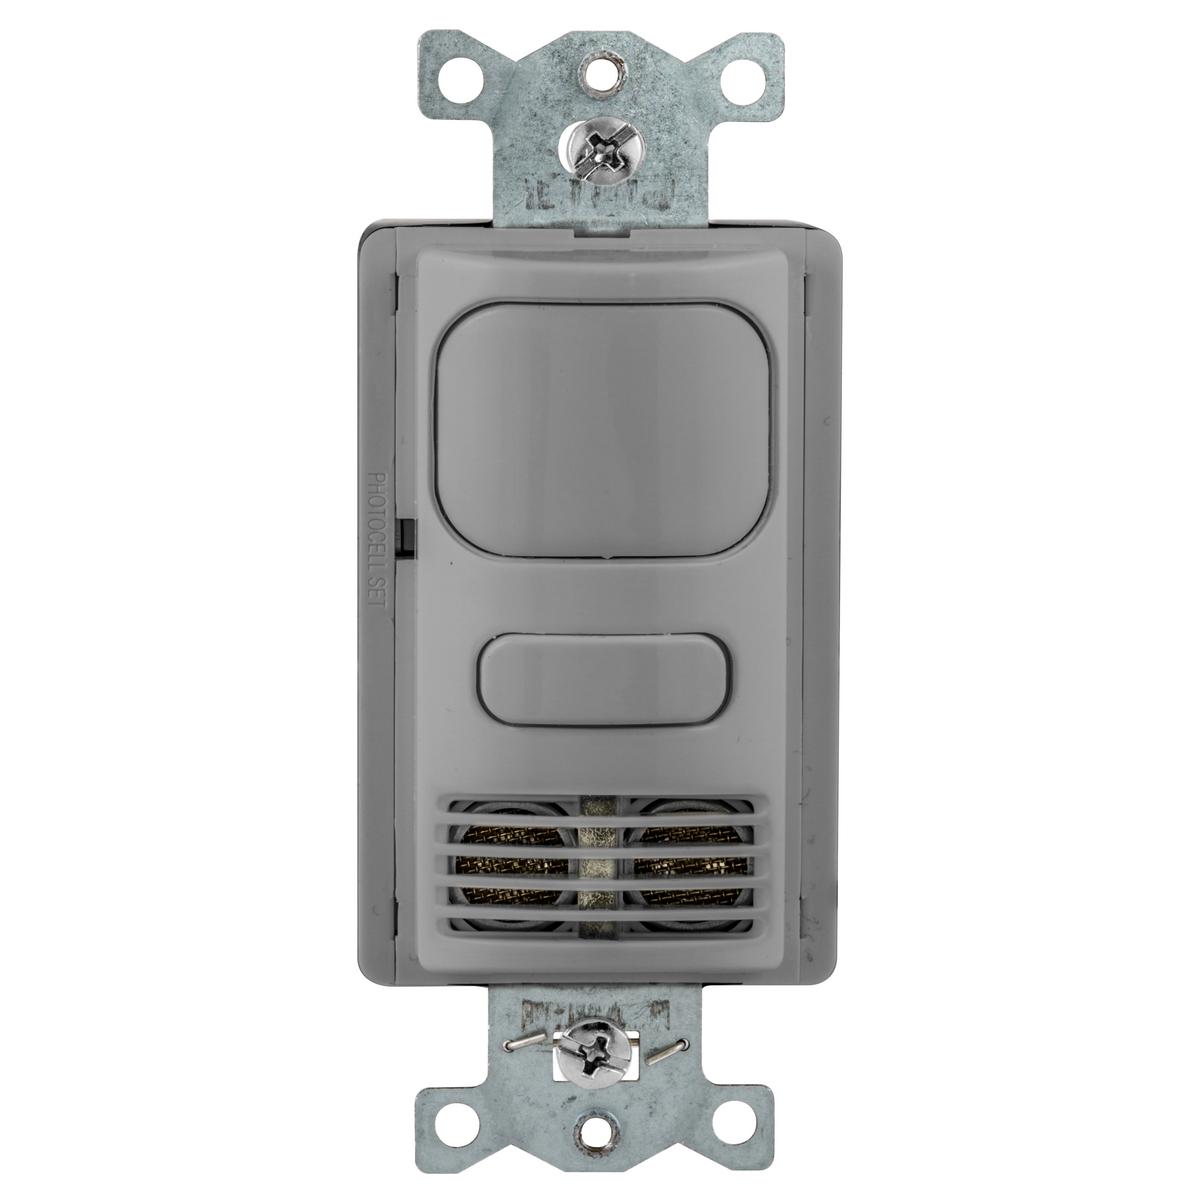 Hubbell AD2240GY1 Occupancy/Vacancy Sensors, Wall Switch,Adaptive Dual Technology, 1 Circuit, 24V DC, Gray 